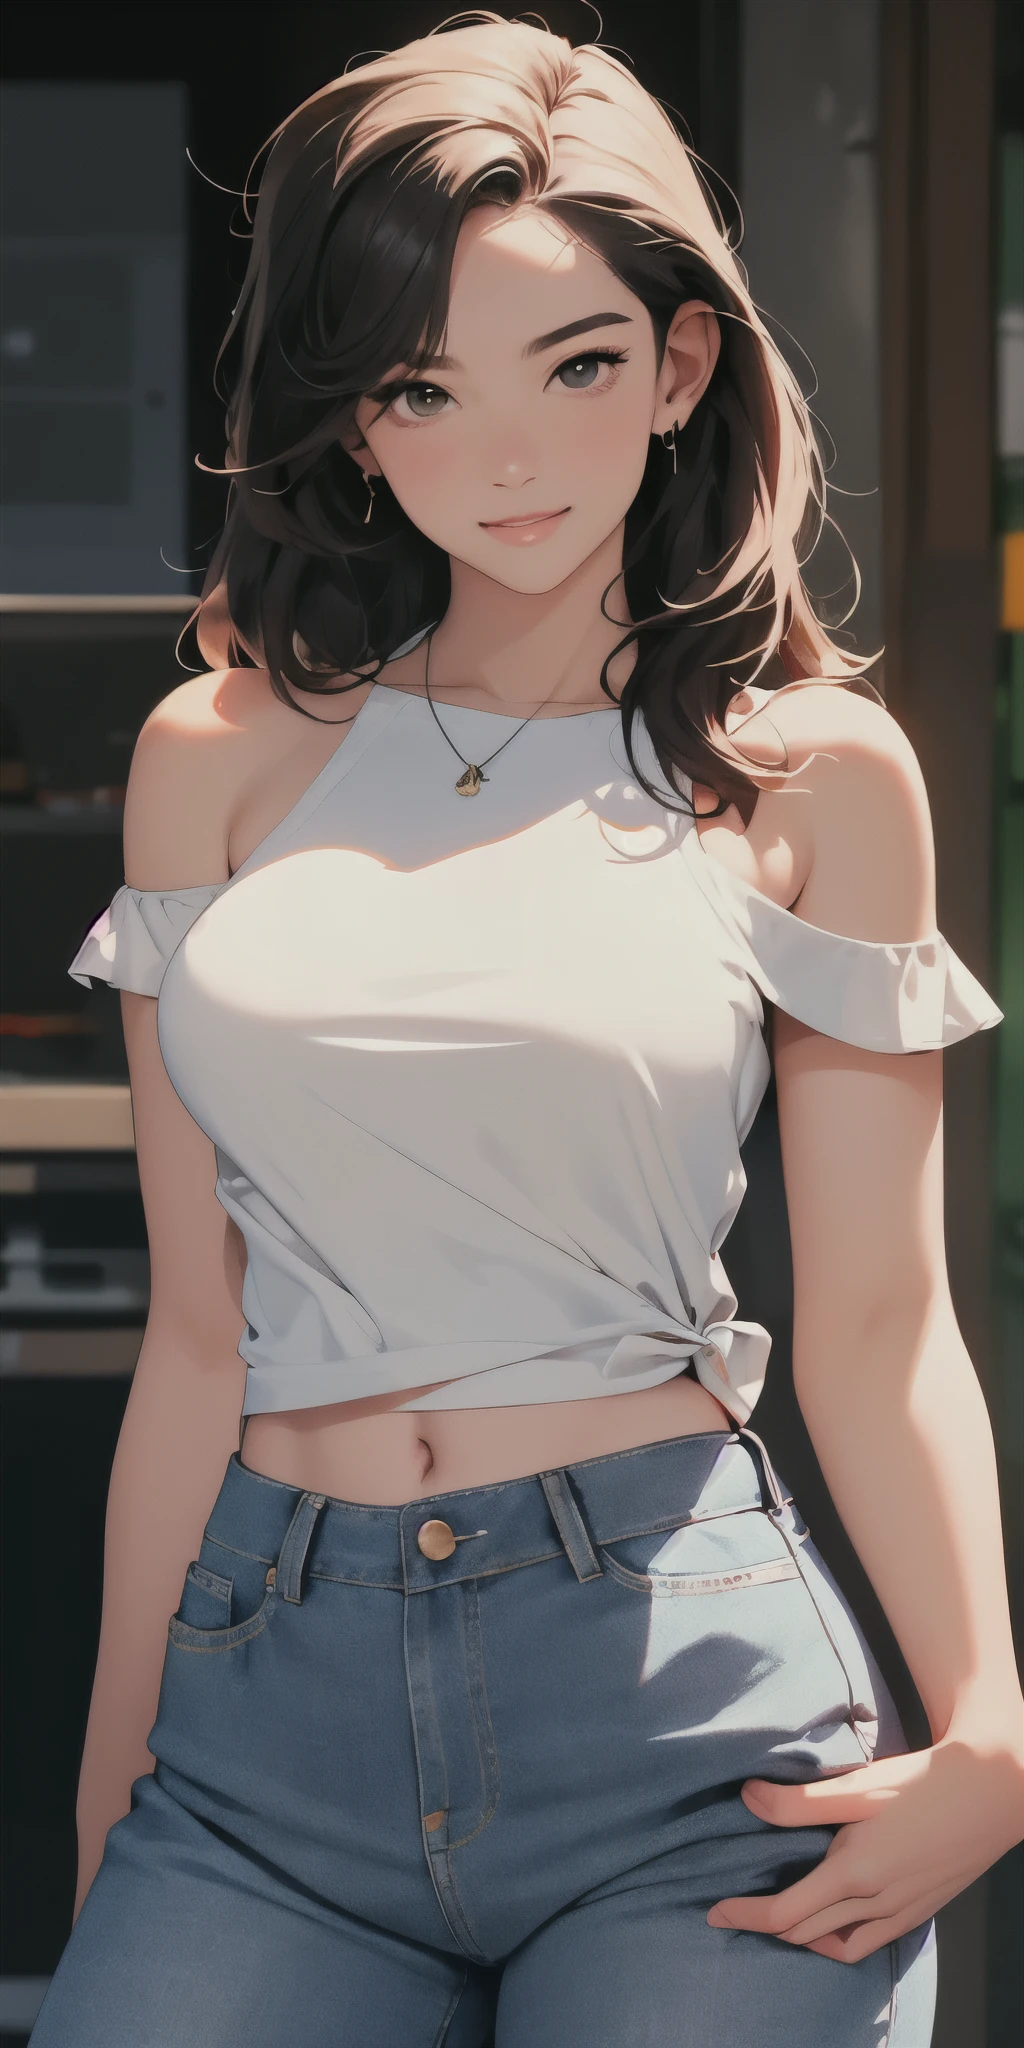 Best quality, masterpiece, super high resolution, original photo, a woman, jeans, white top bare shoulders, busty figure, school, glowing skin, light smile